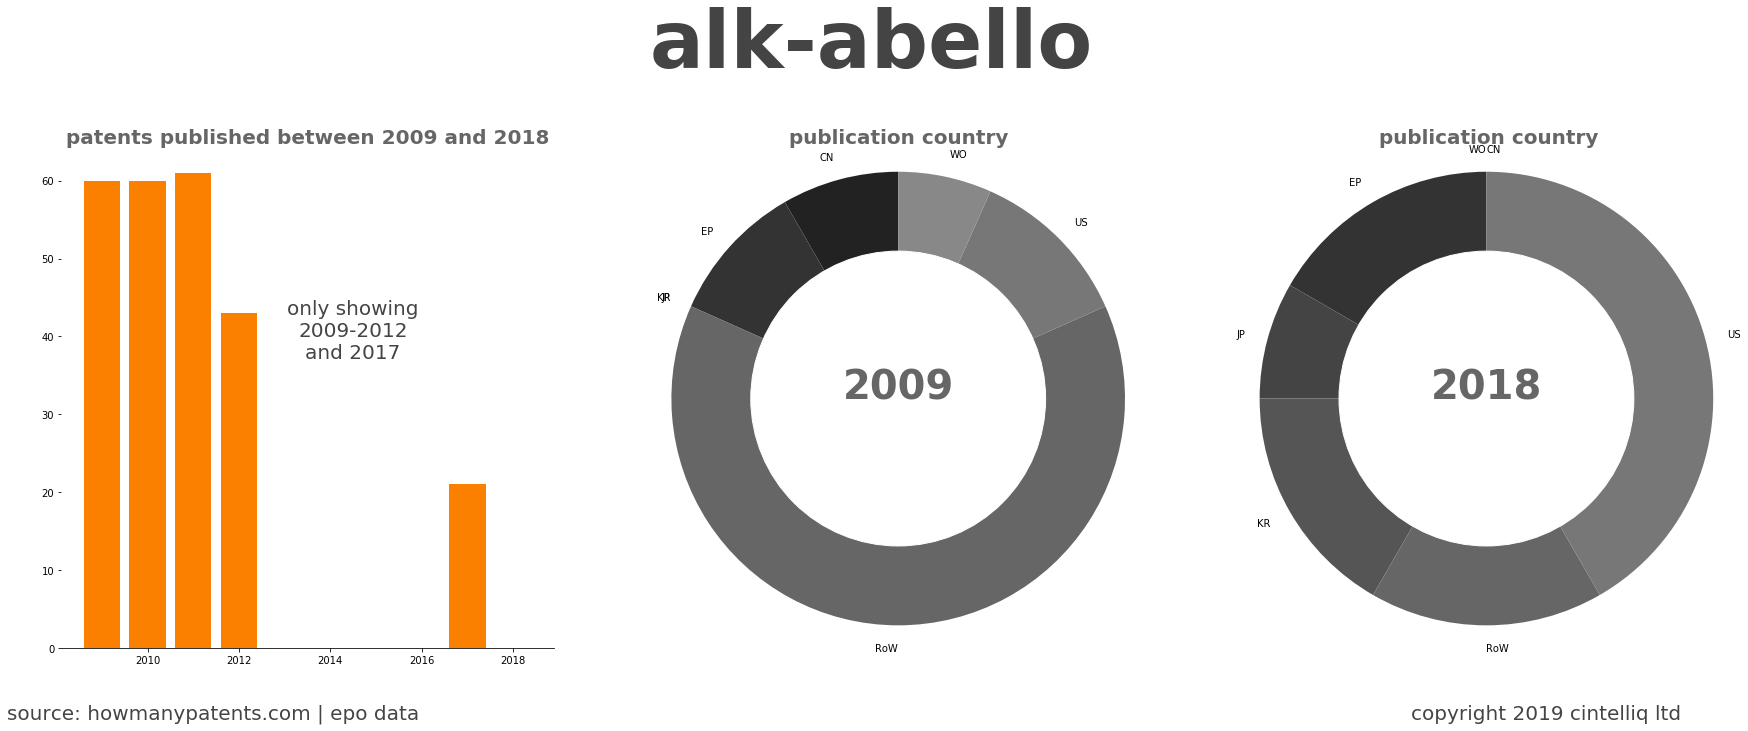 summary of patents for Alk-Abello